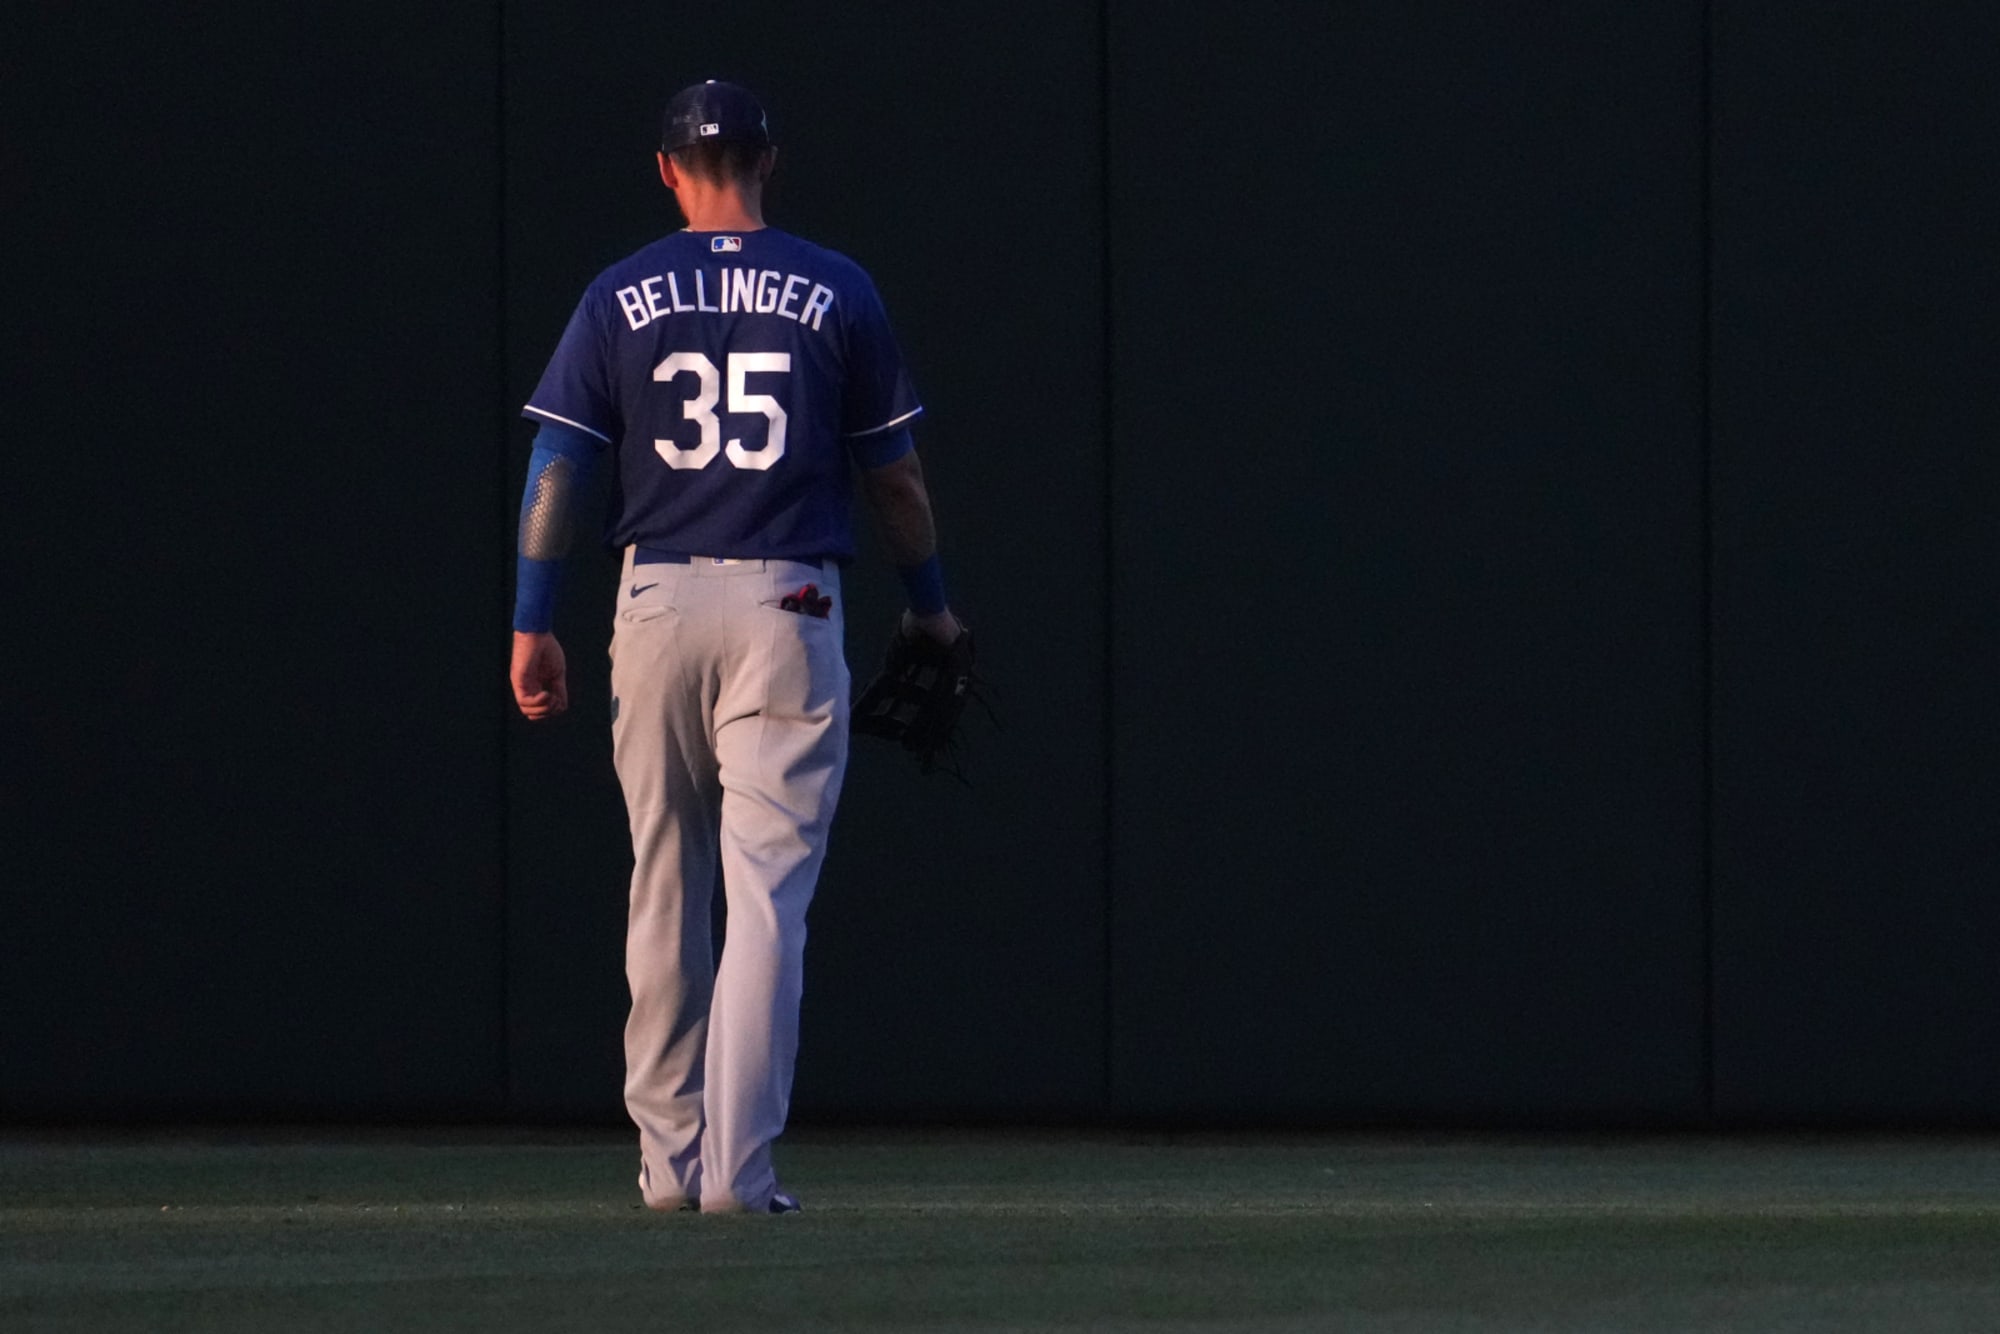 Dodgers news: Cody Bellinger not down about spring training woes